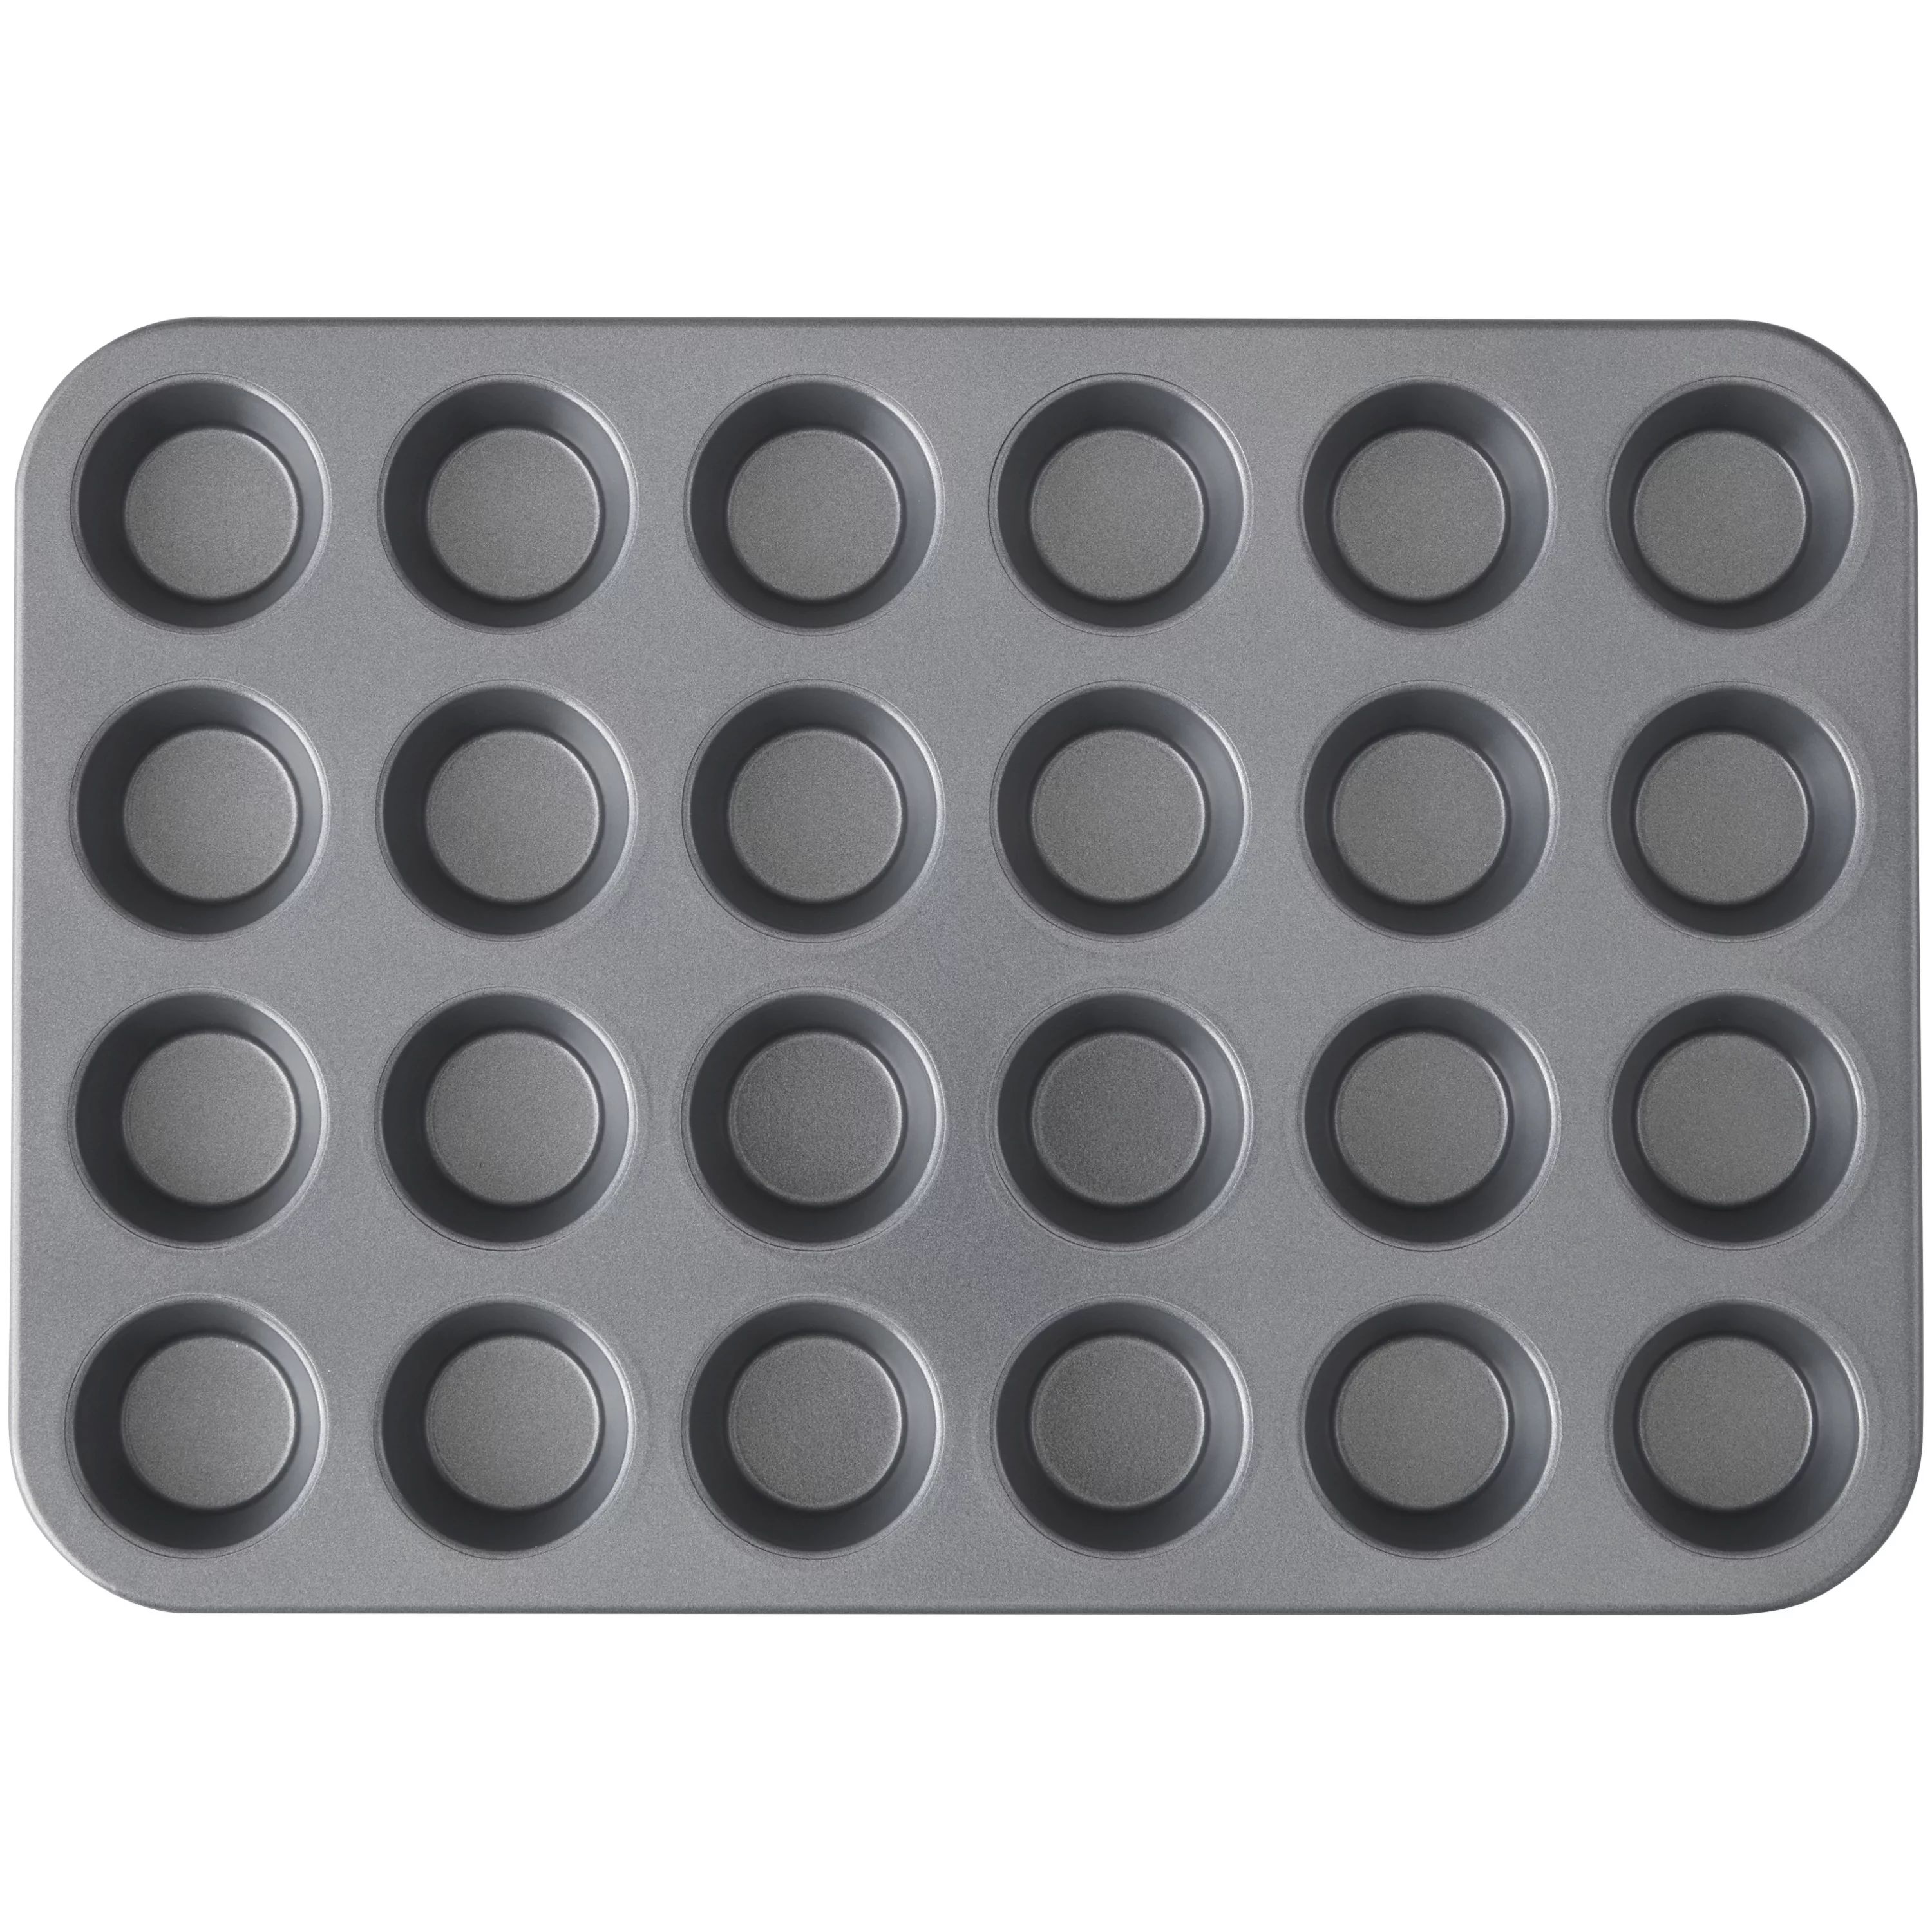 Wilton Bake It Simply Extra Large Non-Stick Mini Muffin Pan, 24-Cup, Pan Size 9.9 x 14.7 in. | Walmart (US)